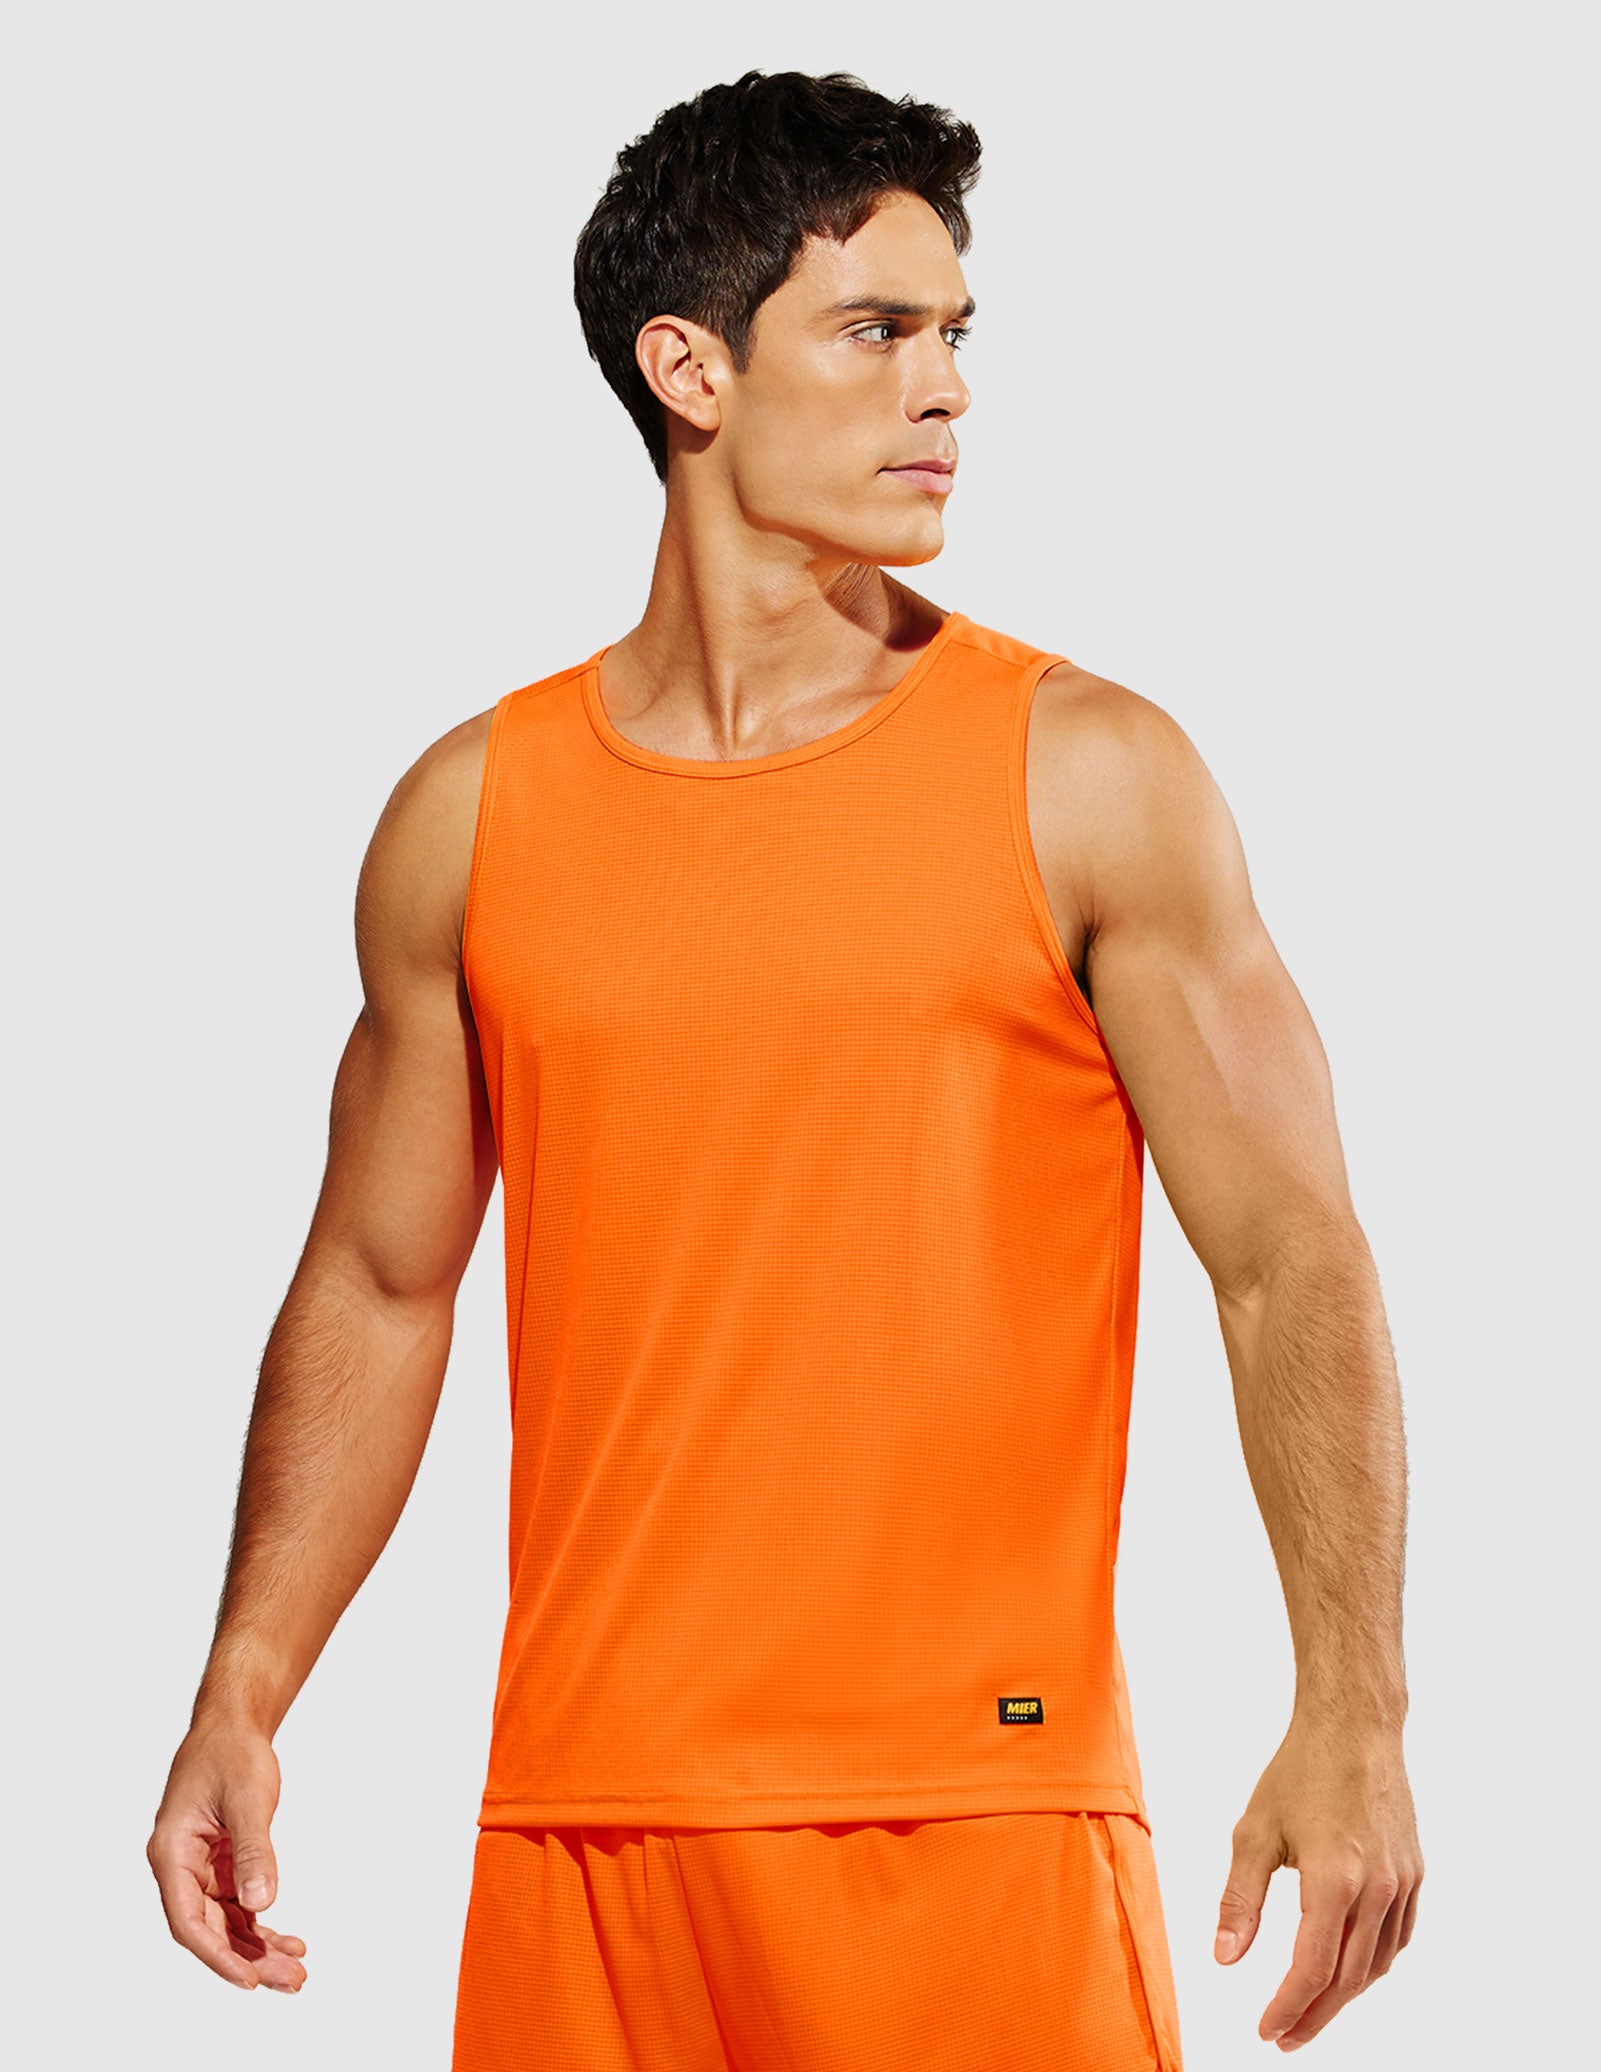 MIER Men's Quick Dry Tank Tops Sleeveless Workout Shirts